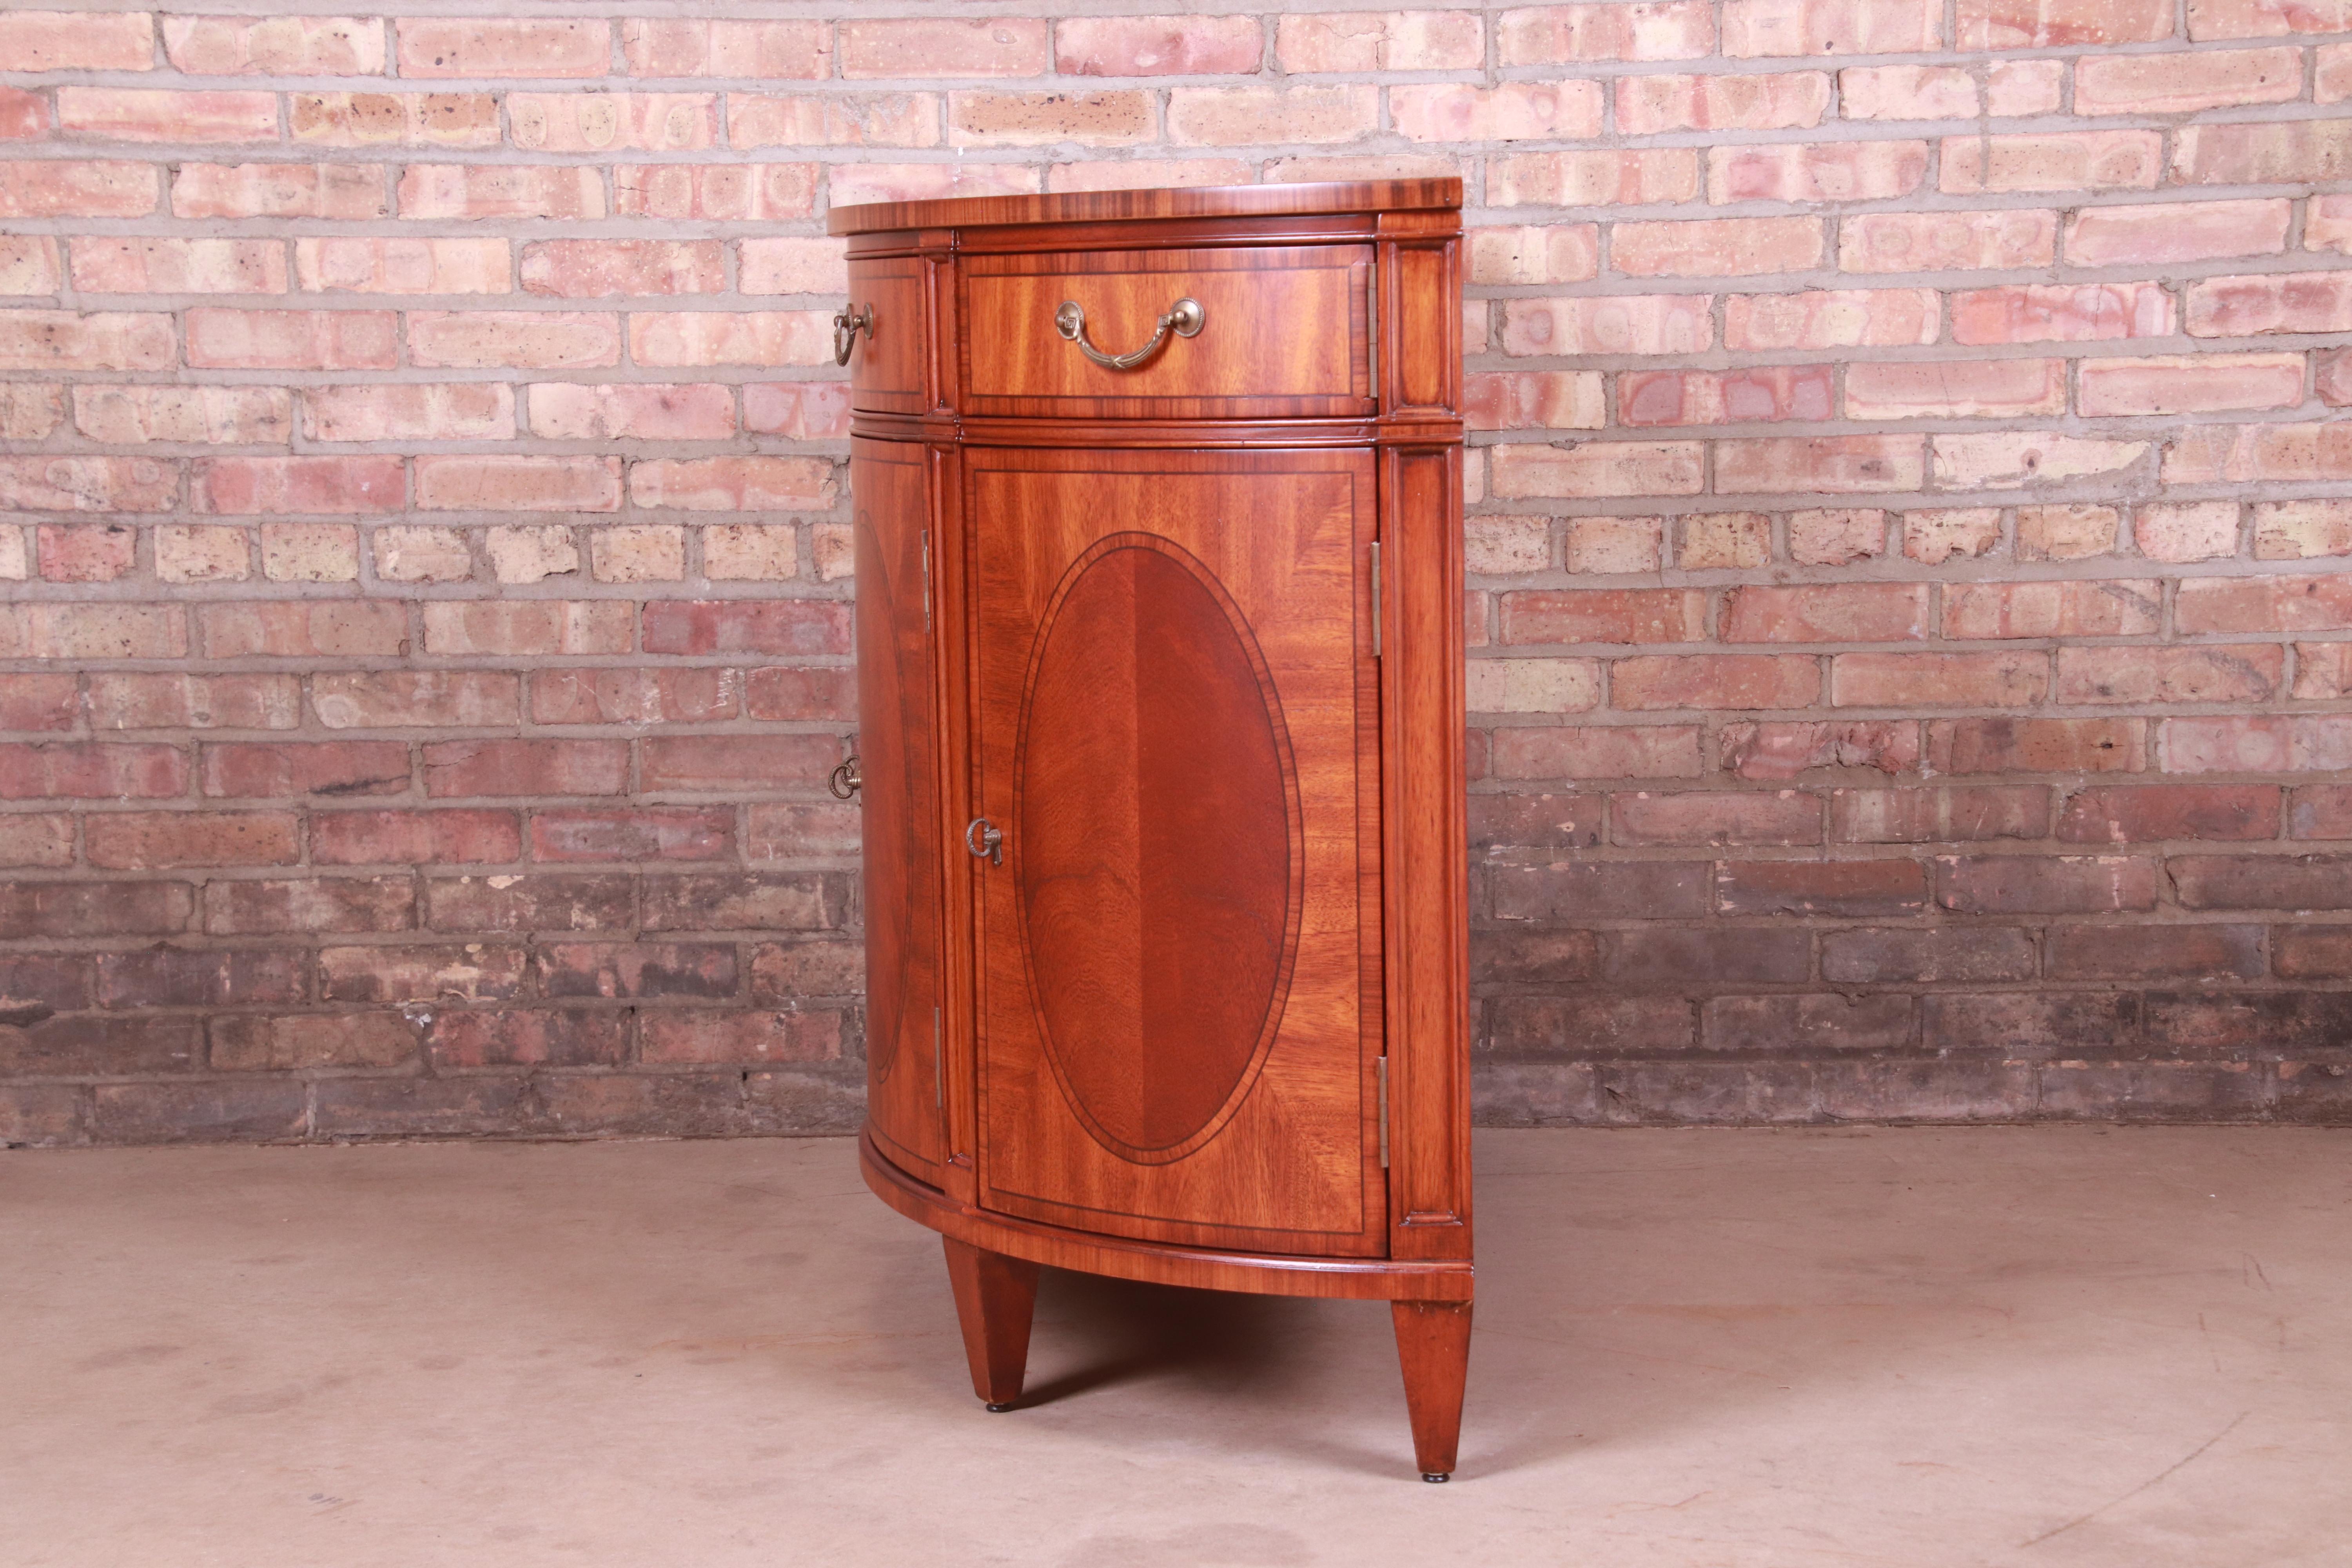 Ethan Allen Regency Inlaid Mahogany Demilune Console or Bar Cabinet, Refinished 7